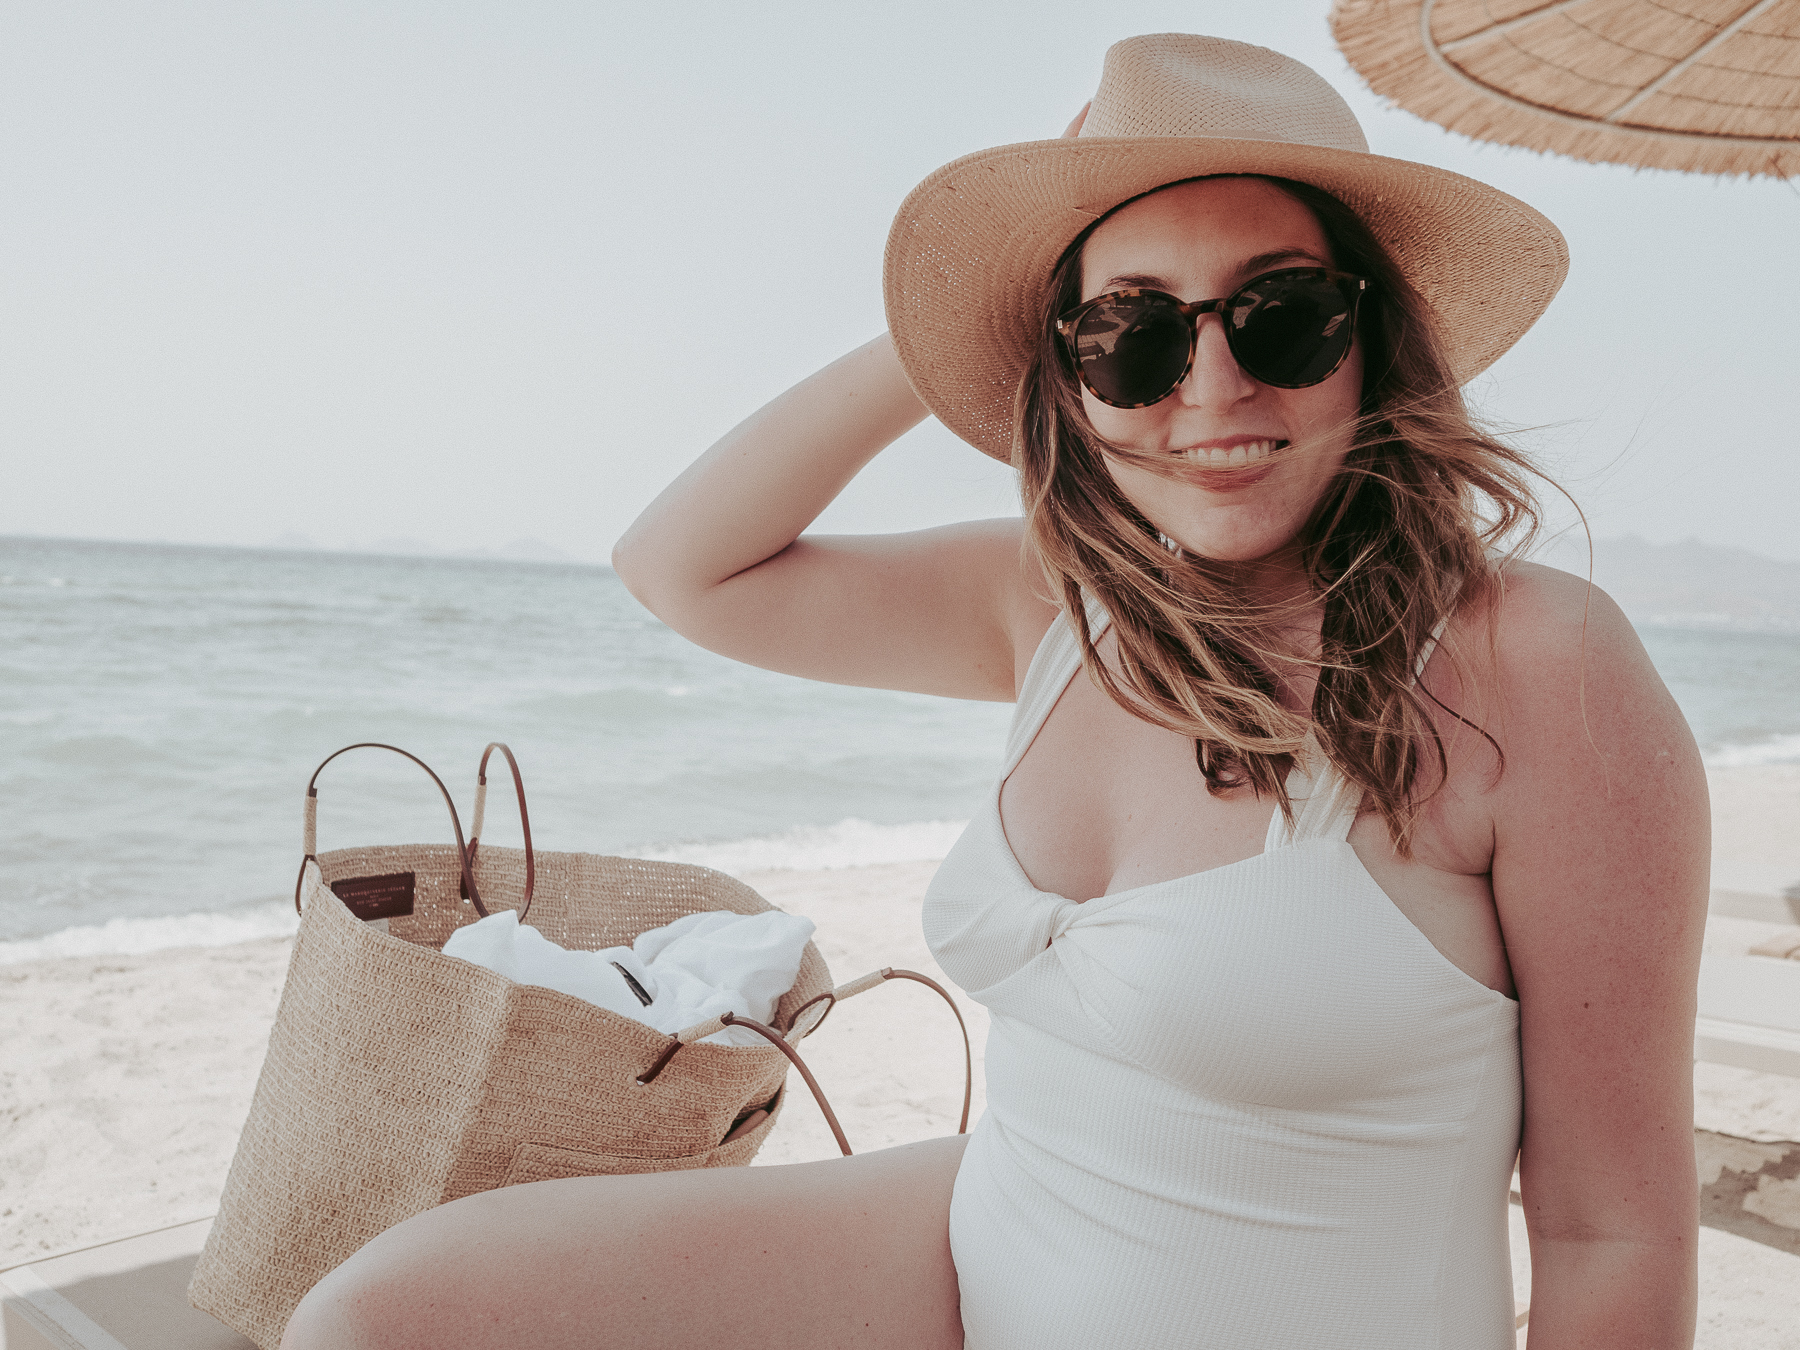 Packing Light: What to Pack for a 4 Day Summer Babymoon in Greece